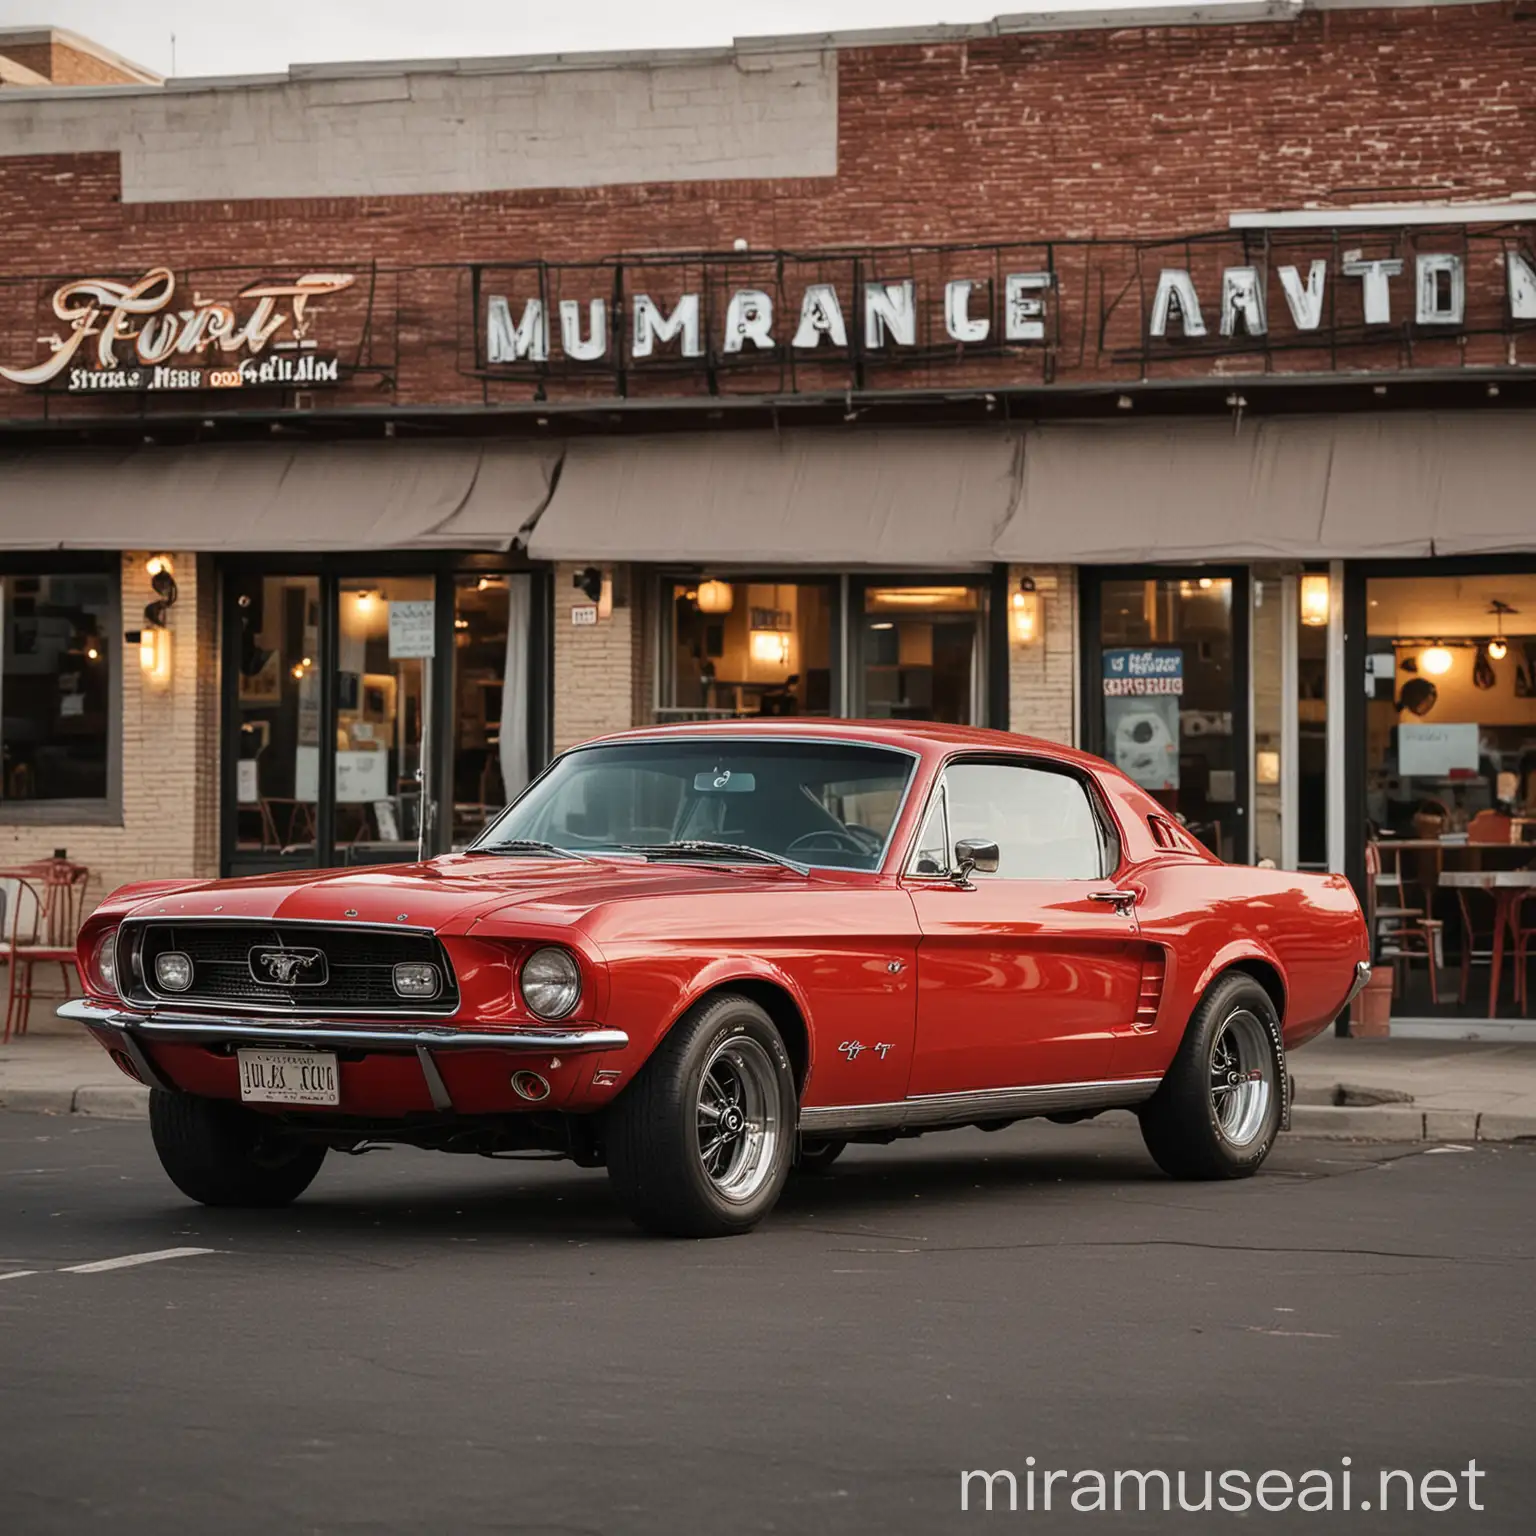 Vintage Red Ford Mustang Parked by Side of Restaurant